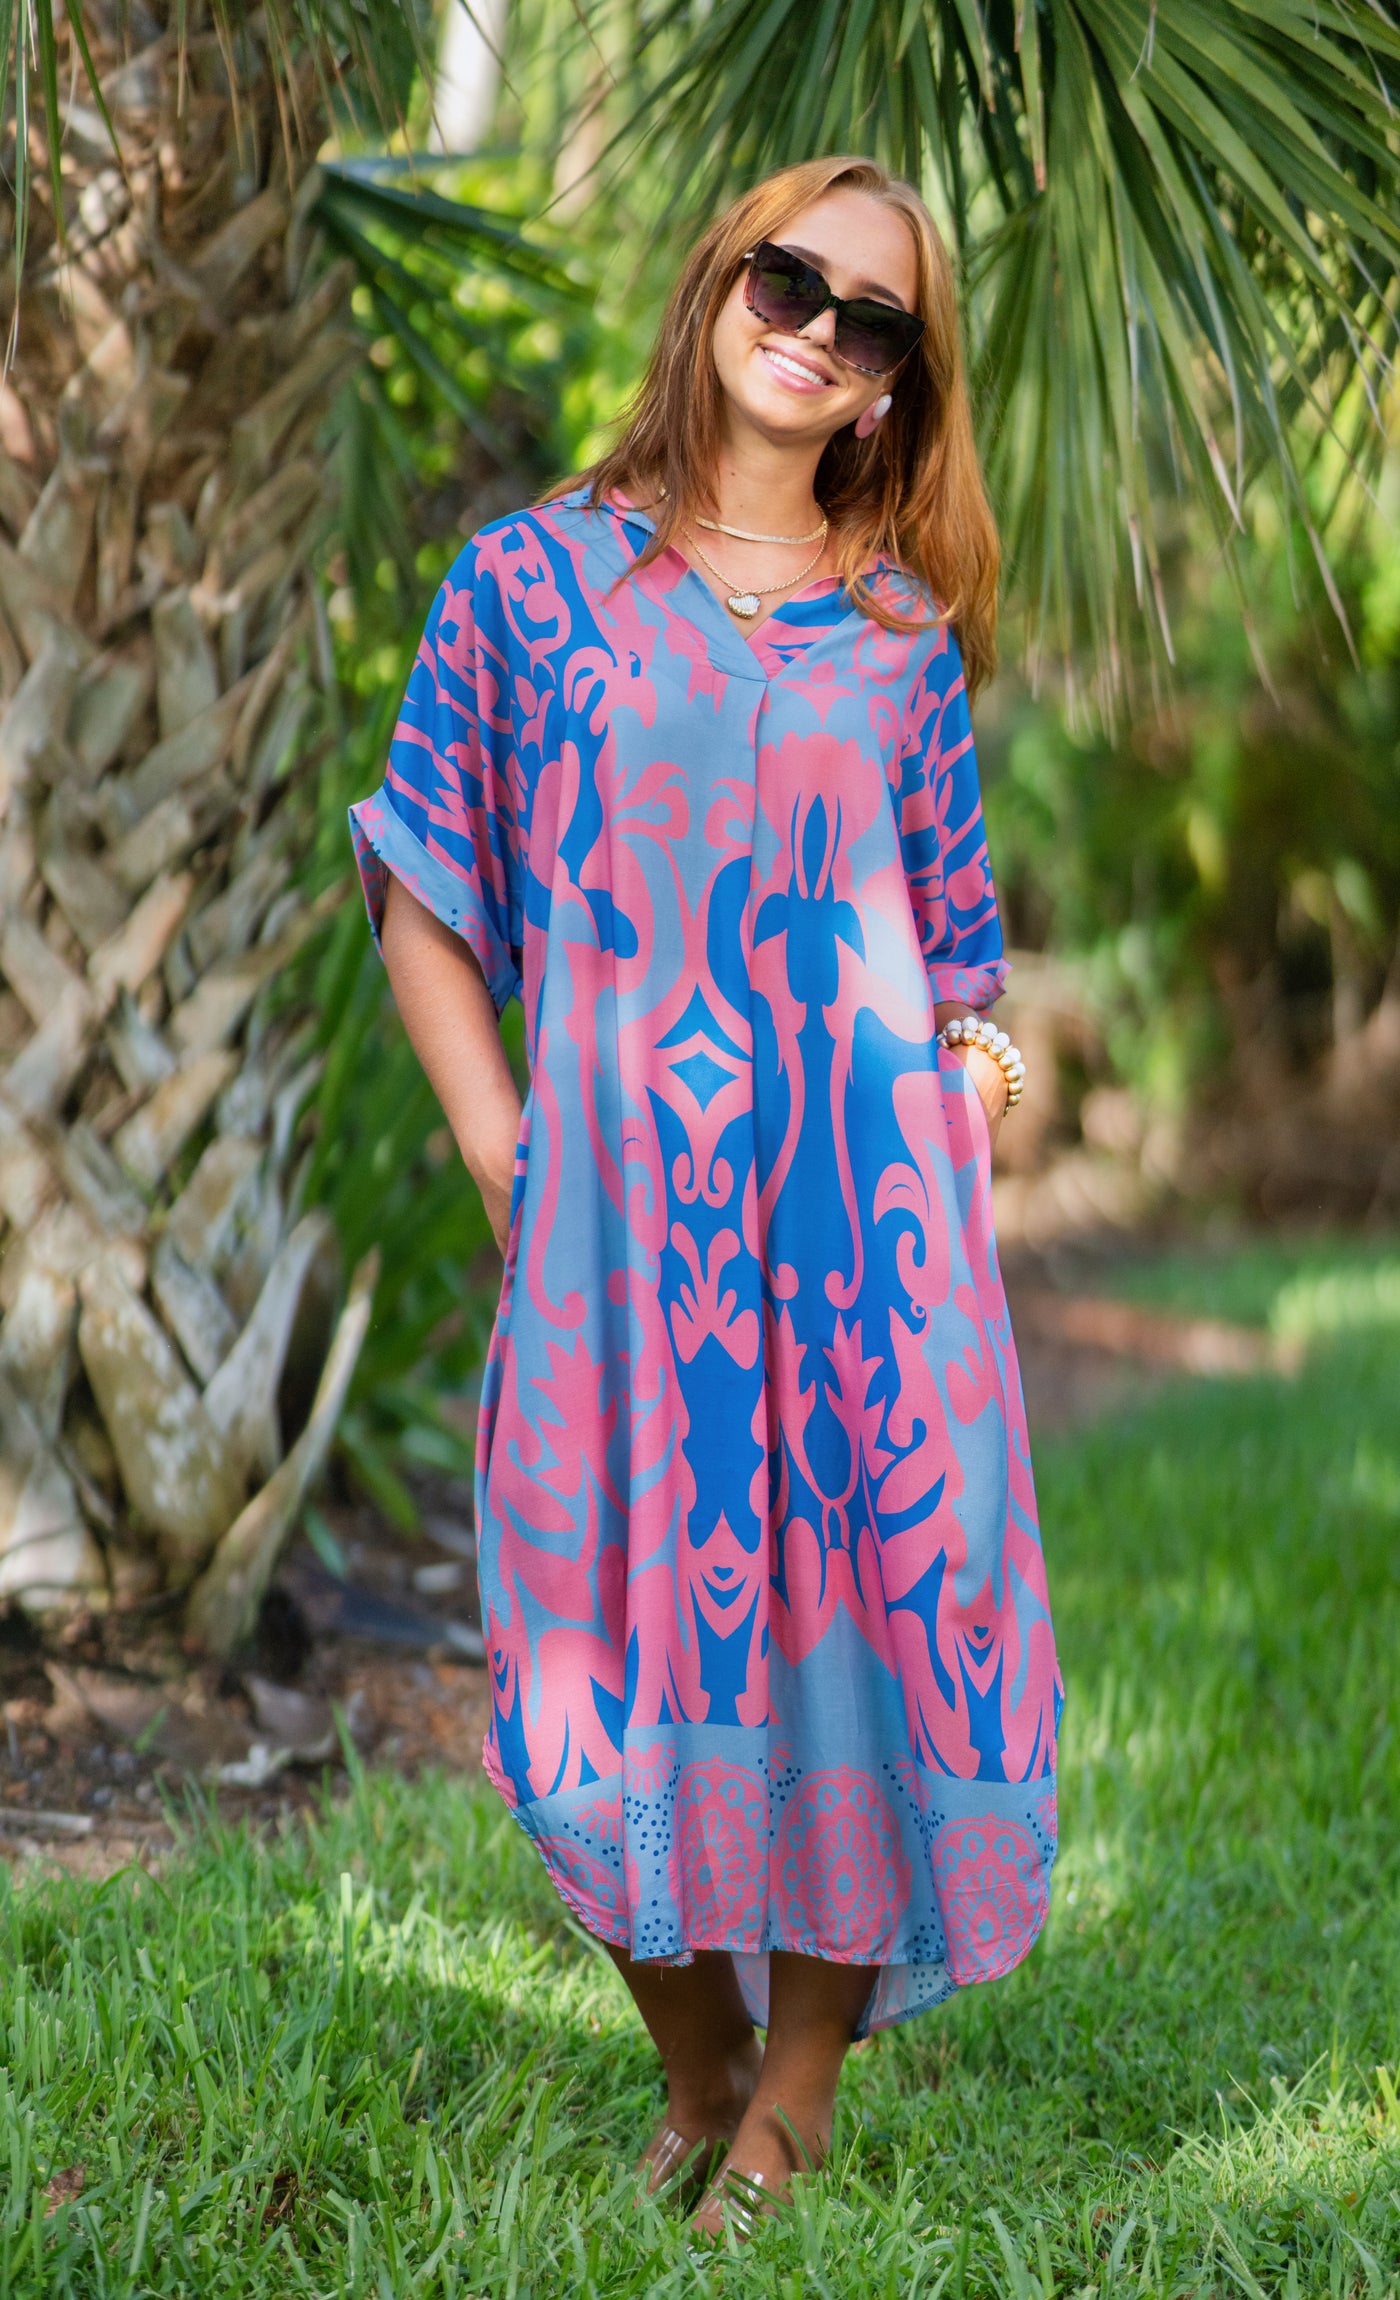 Rosanna - Beautifully exotic patterned pink and blue daytime dress